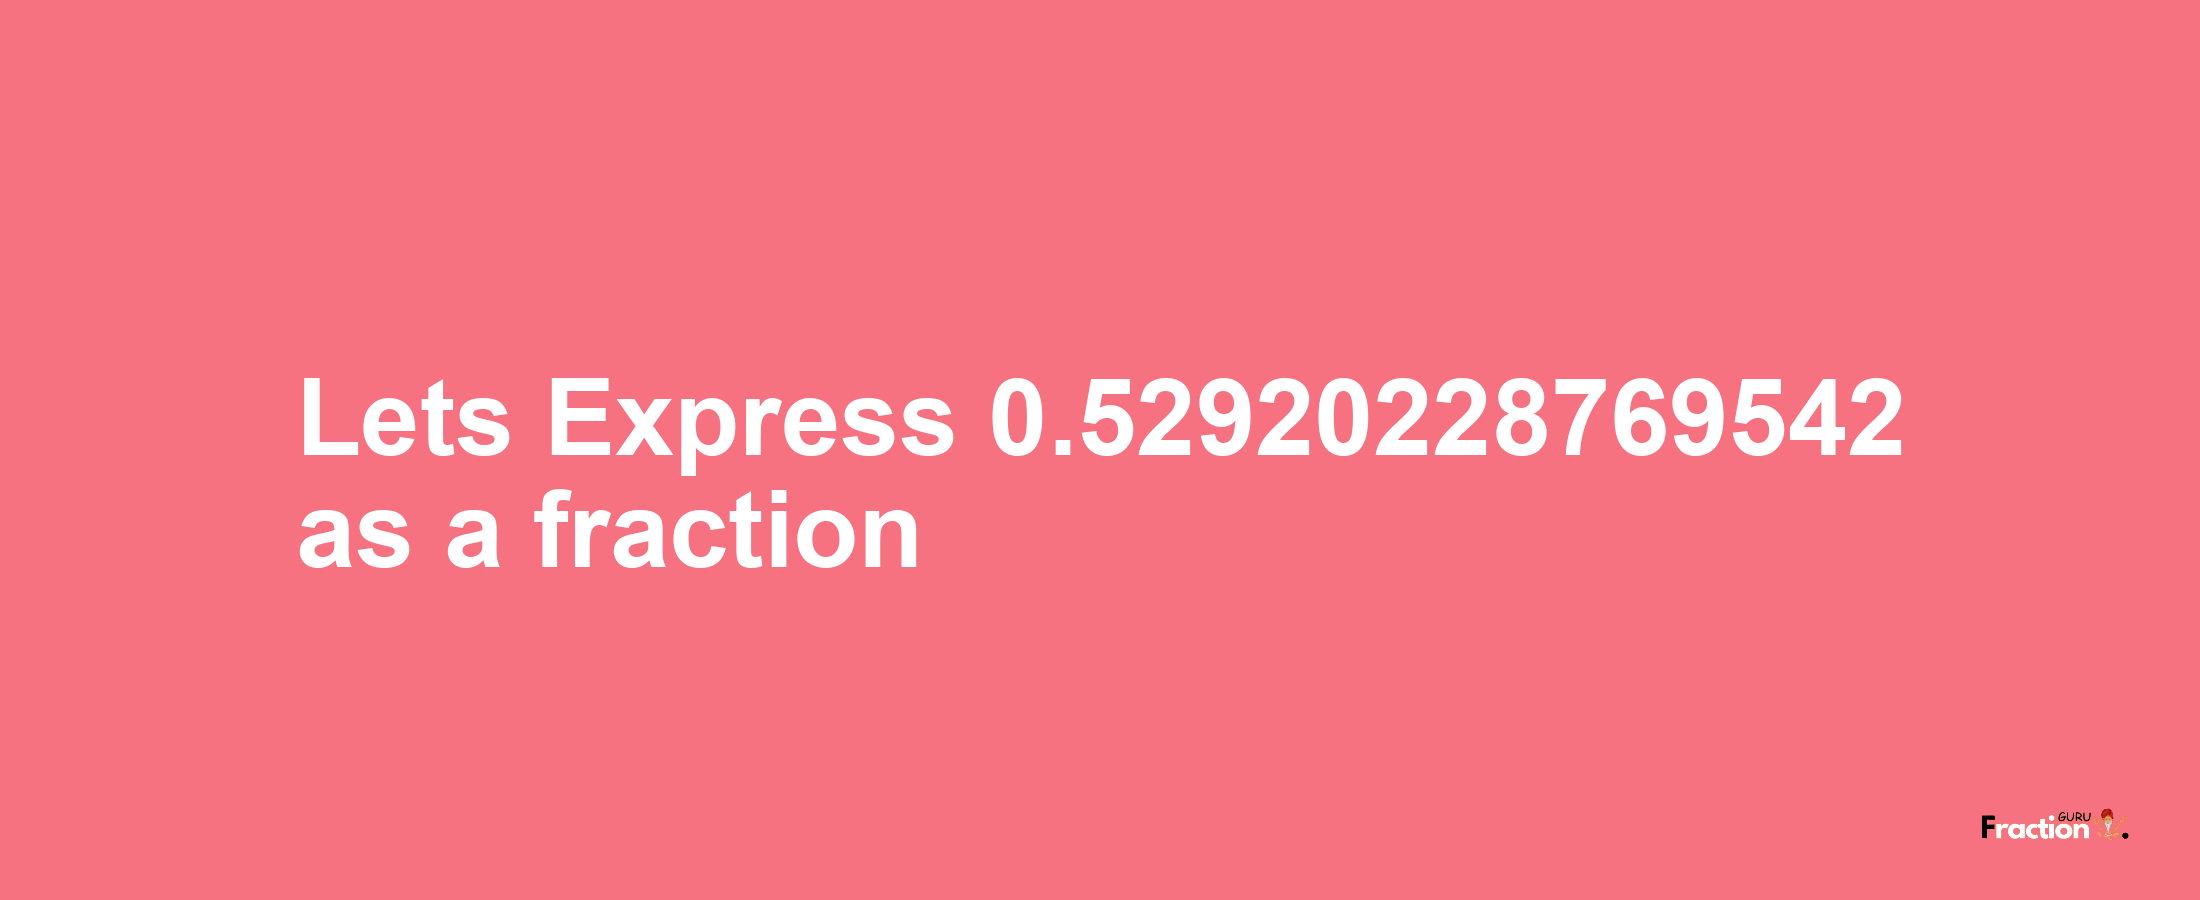 Lets Express 0.52920228769542 as afraction